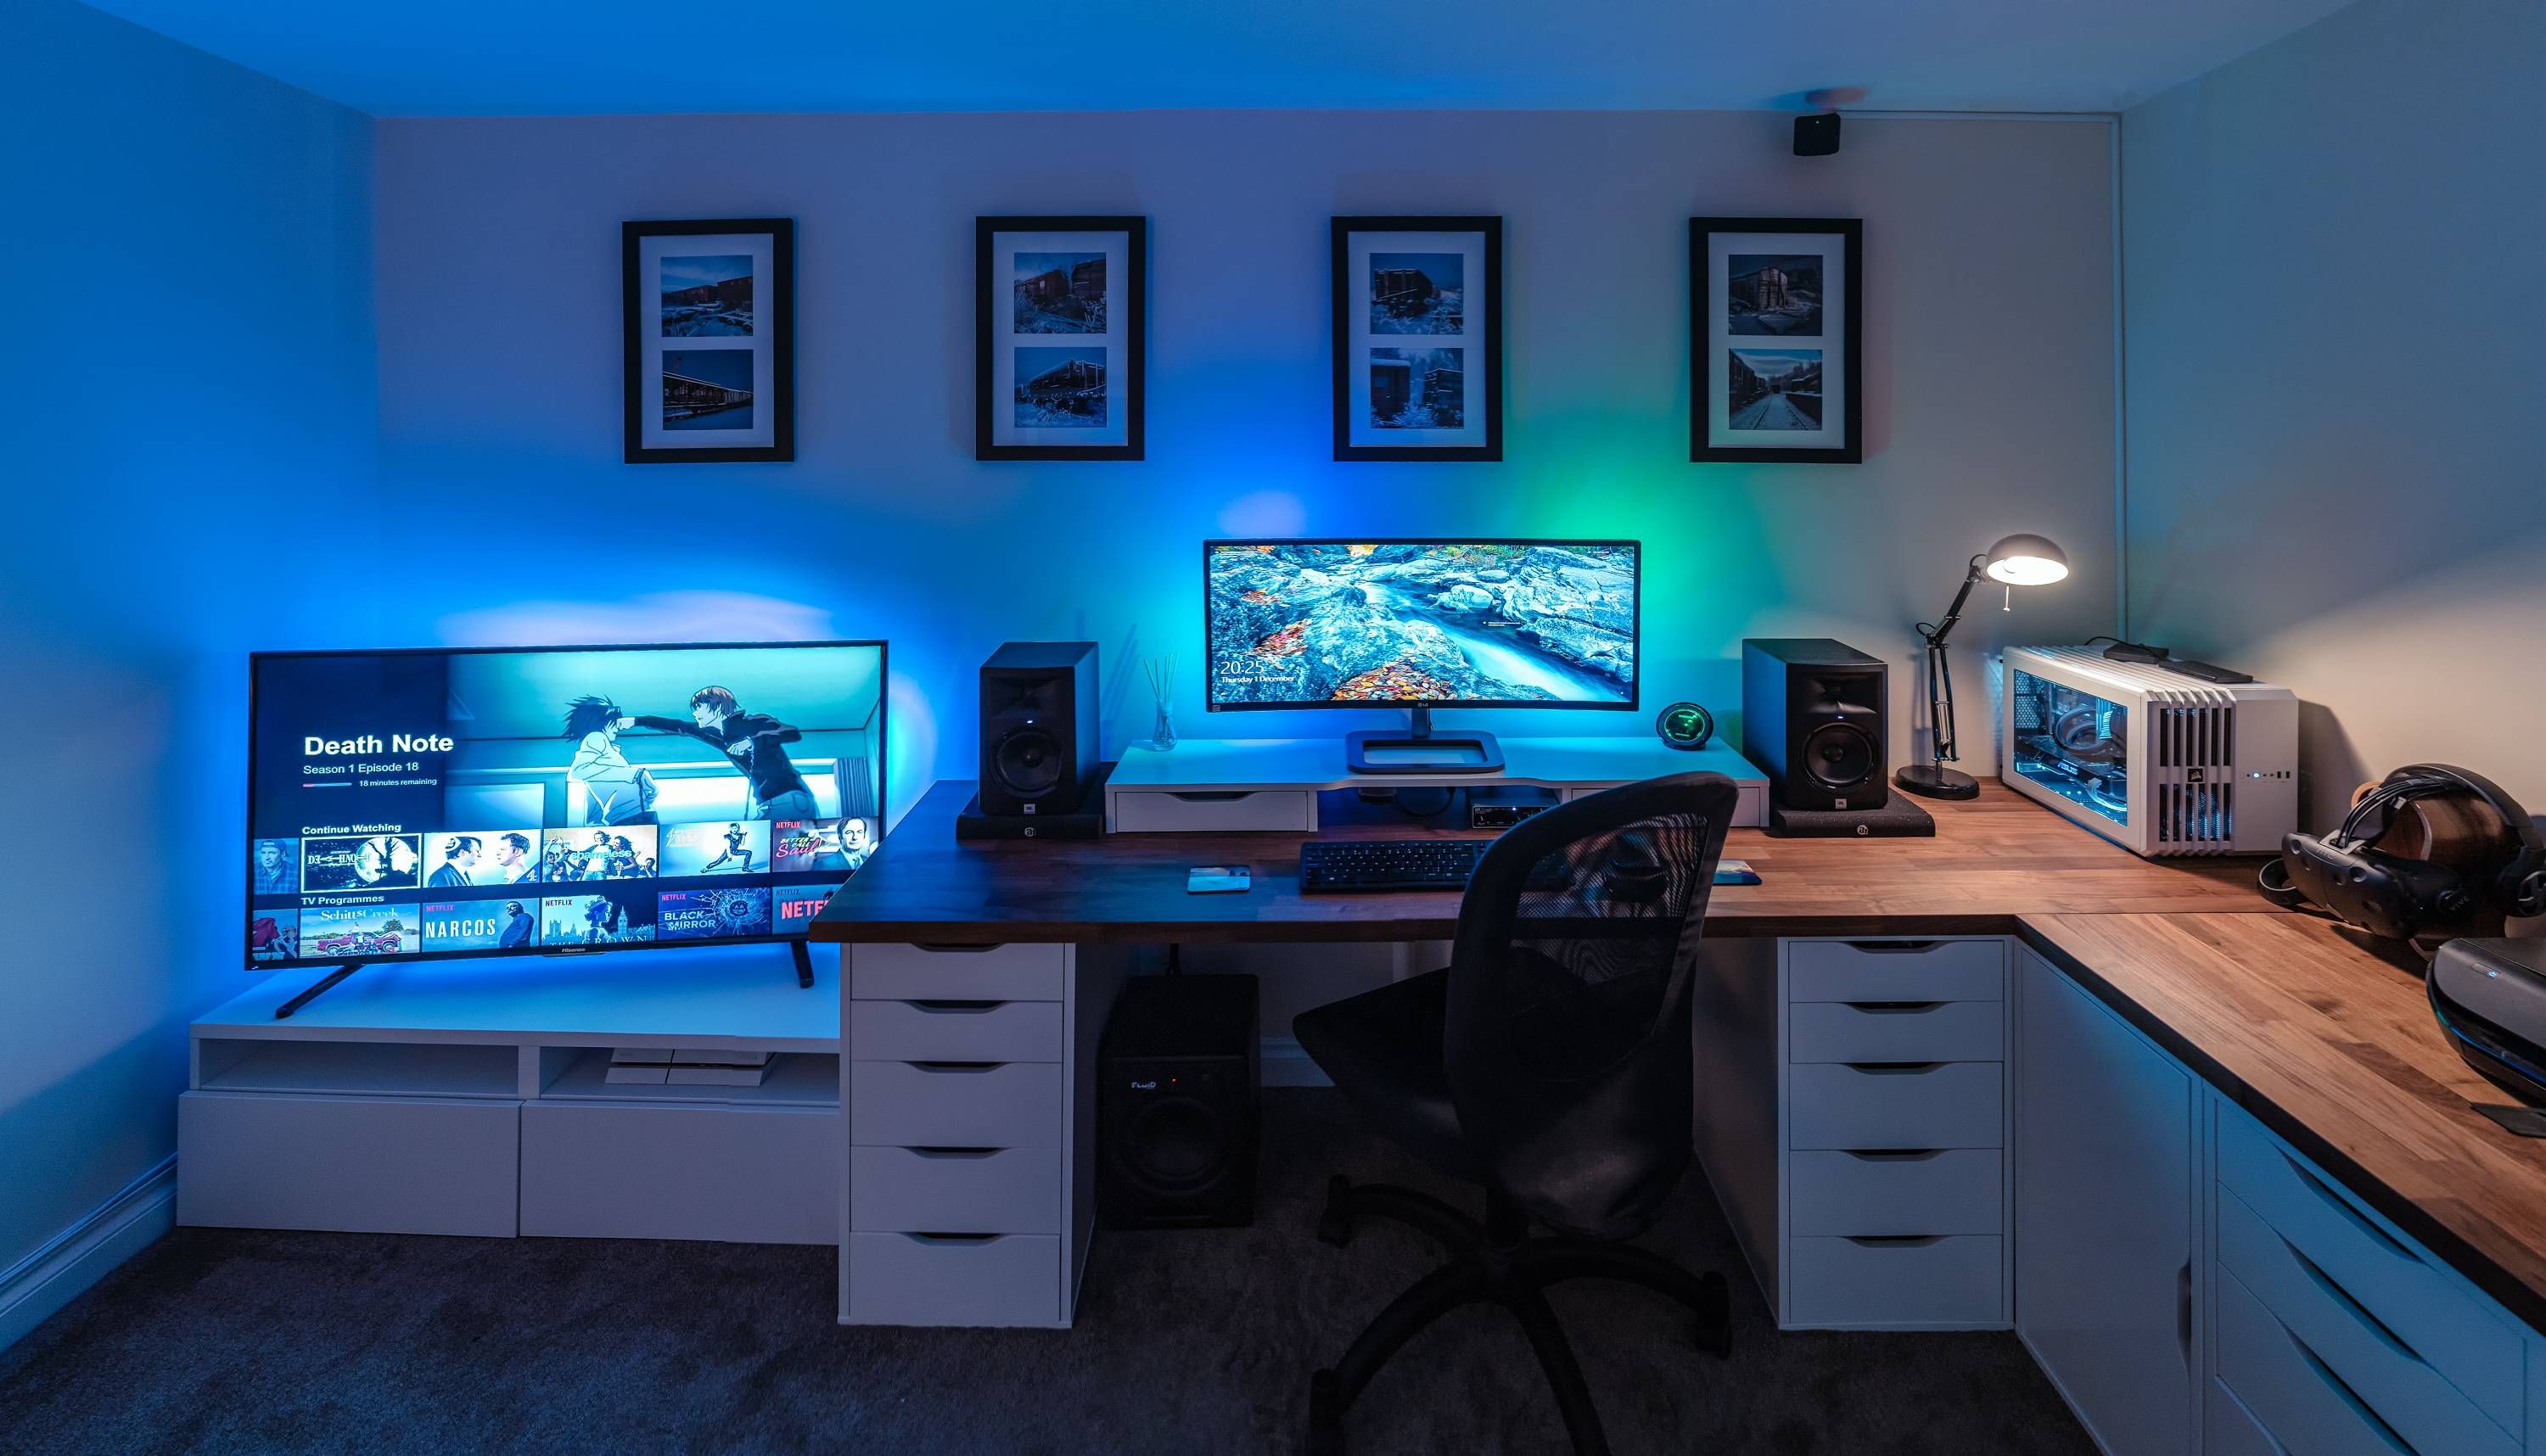 Amazing Video Game Room Decoration picture  - Freelancer and gamer computer room setup design picture for idea - mrlaboratory.info